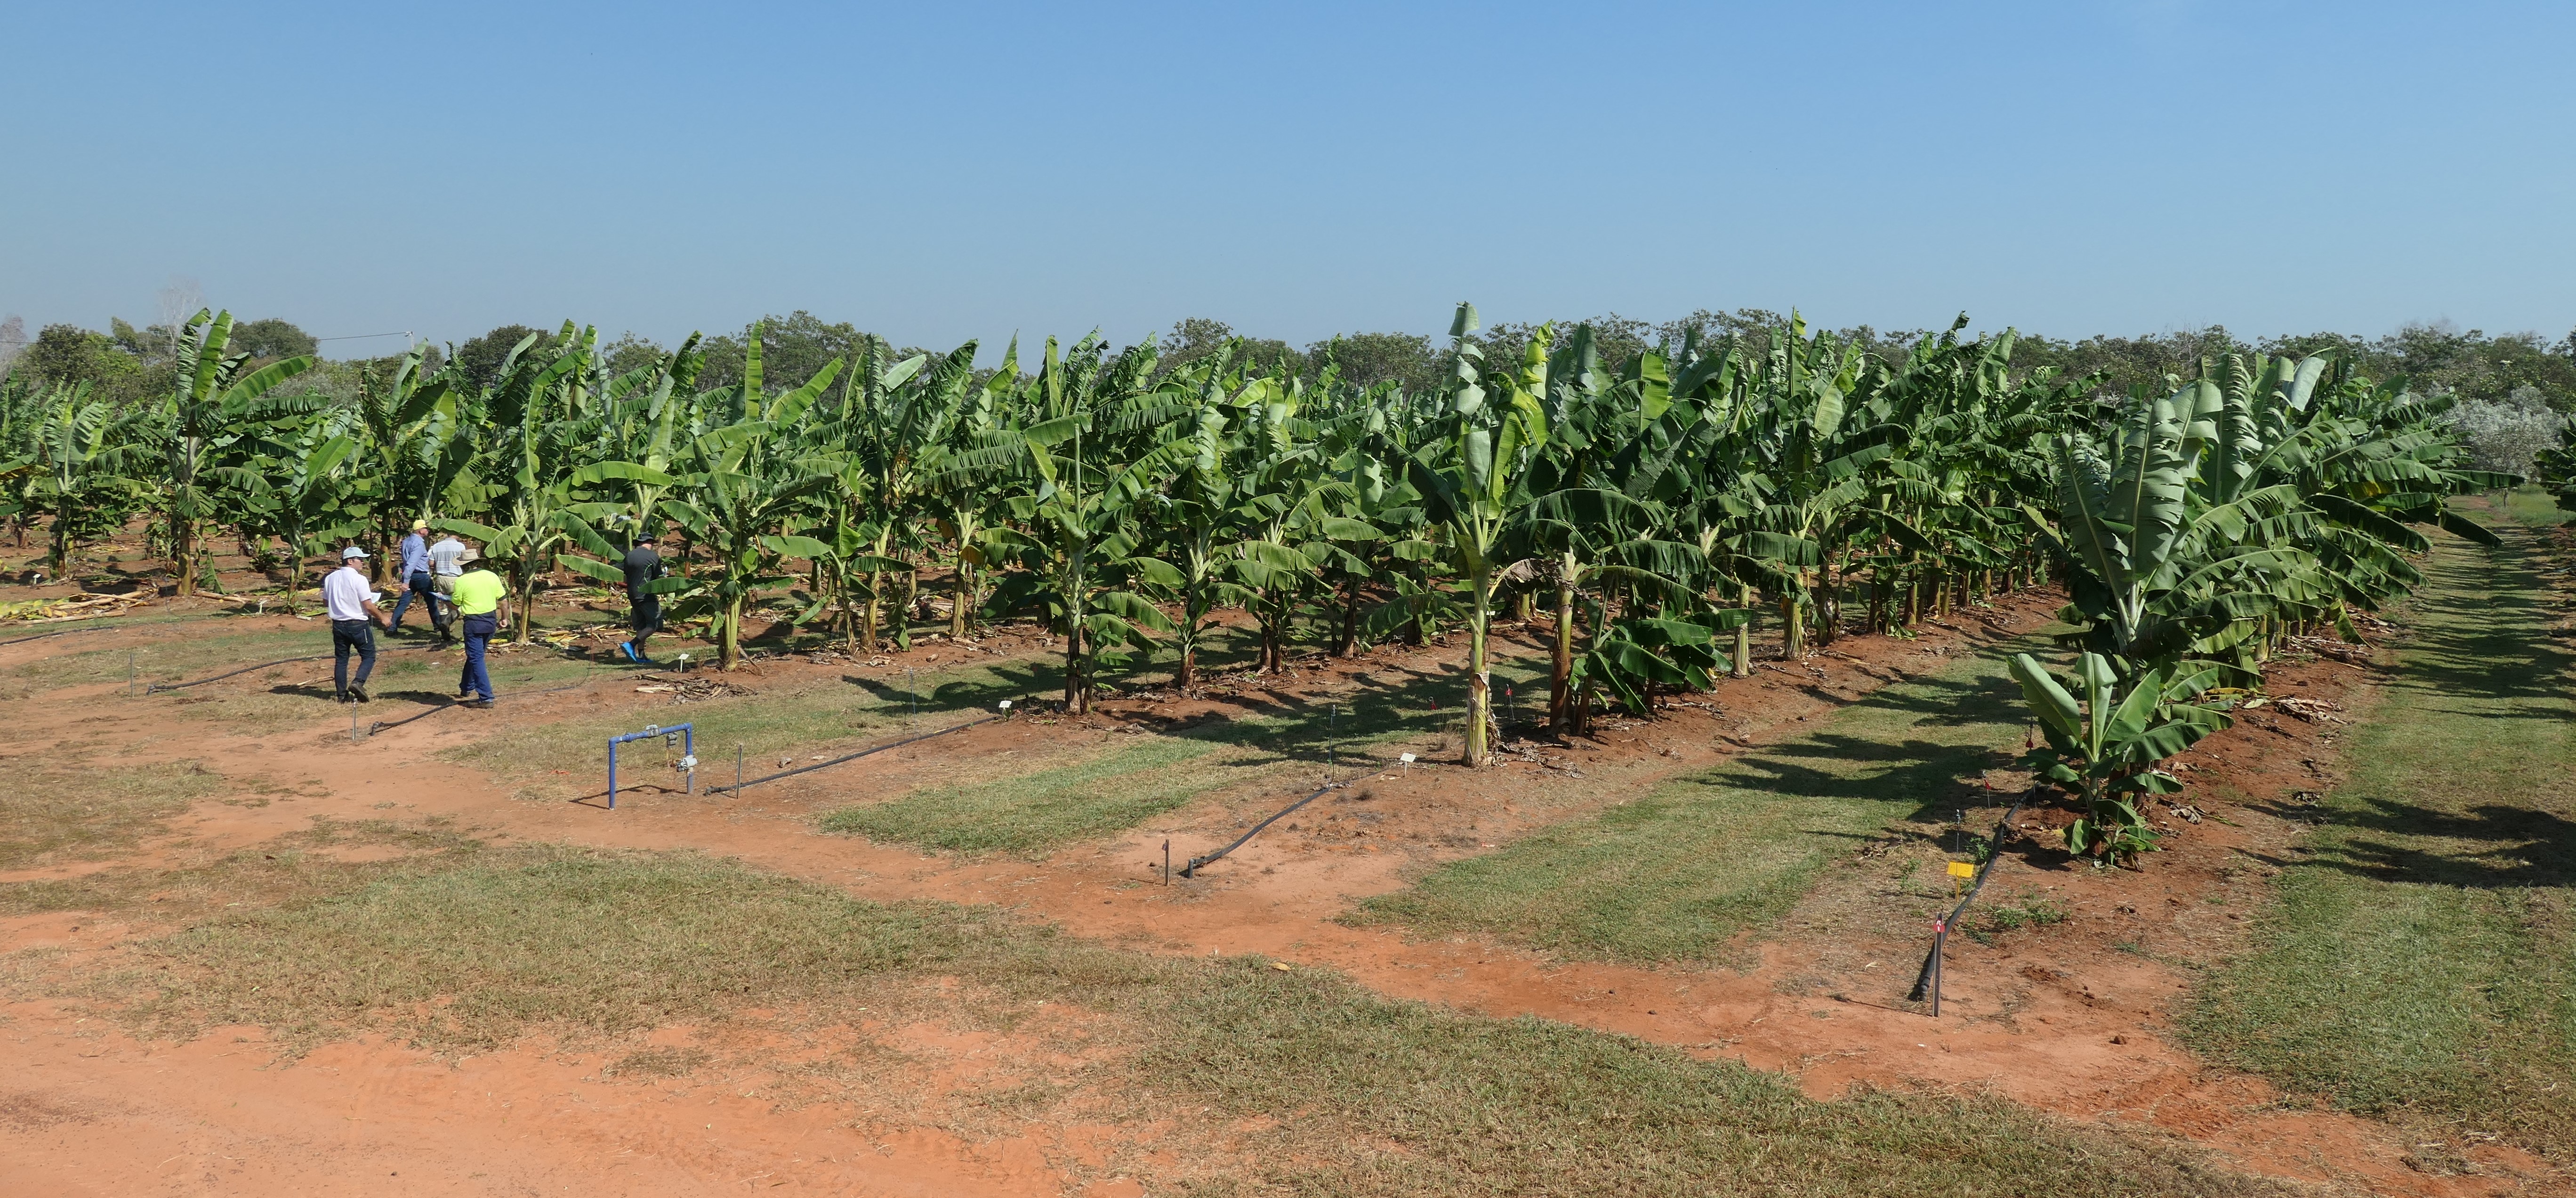 The TR4 varietal screening trial planted in December 2018 is evaluating the disease reaction of 32 varieties over a plant and ratoon crop.